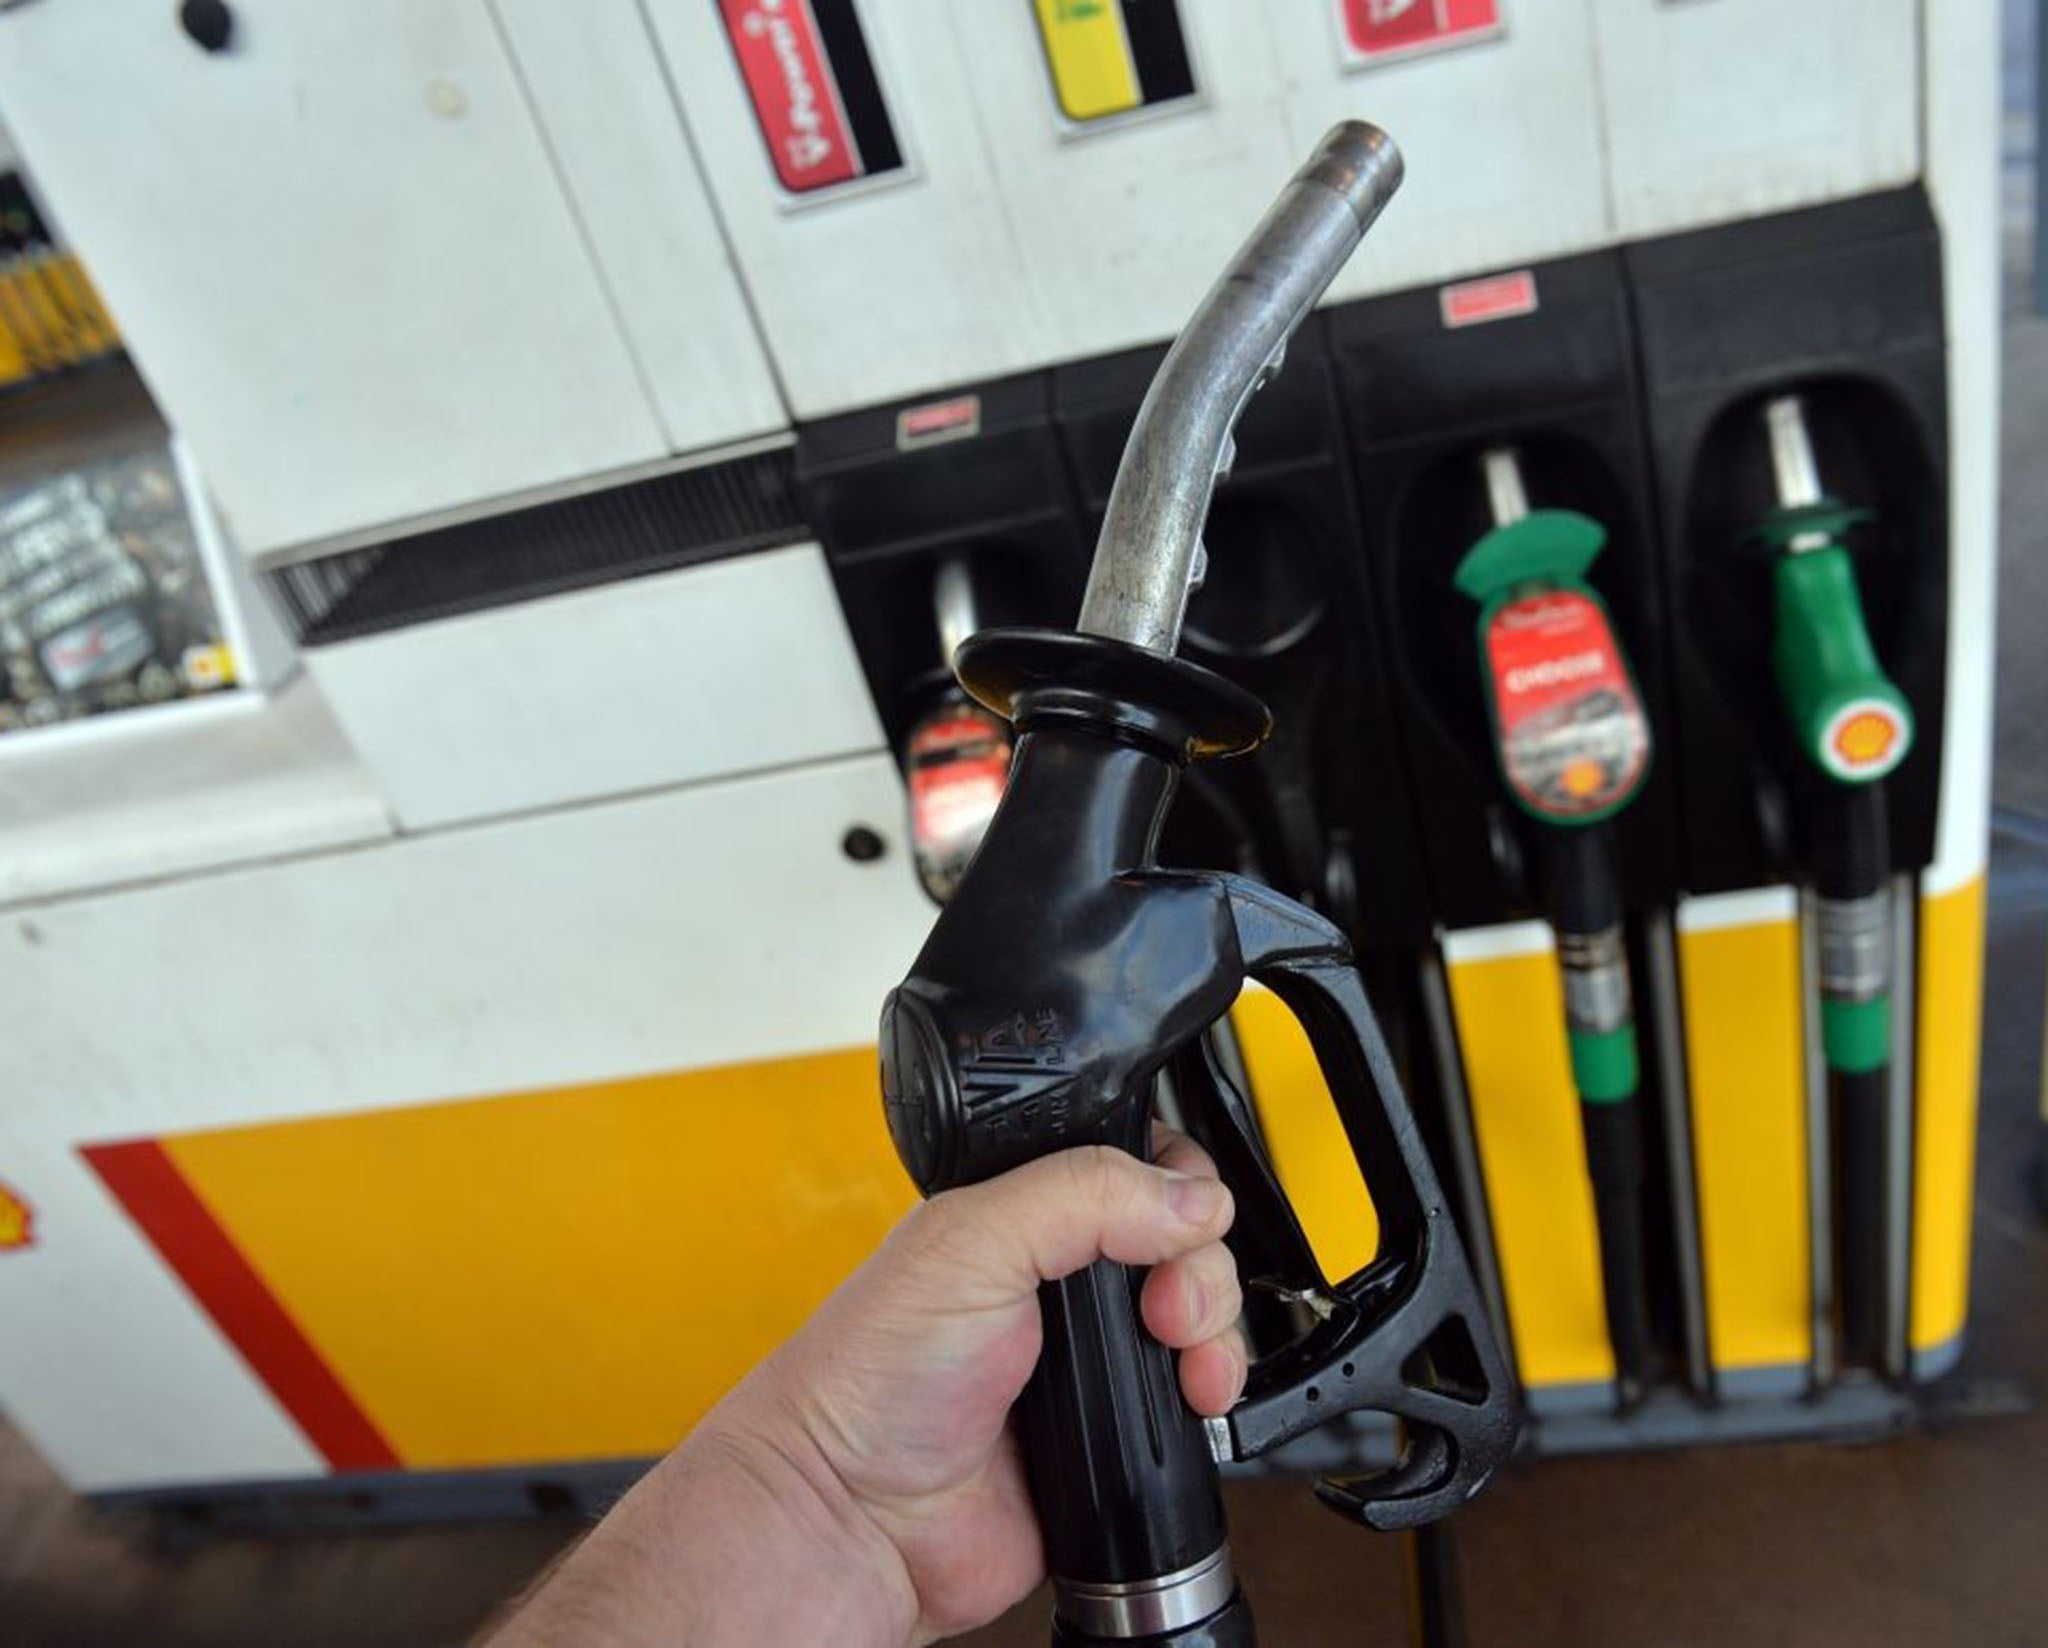 Petrol prices have fallen to an 11-year low